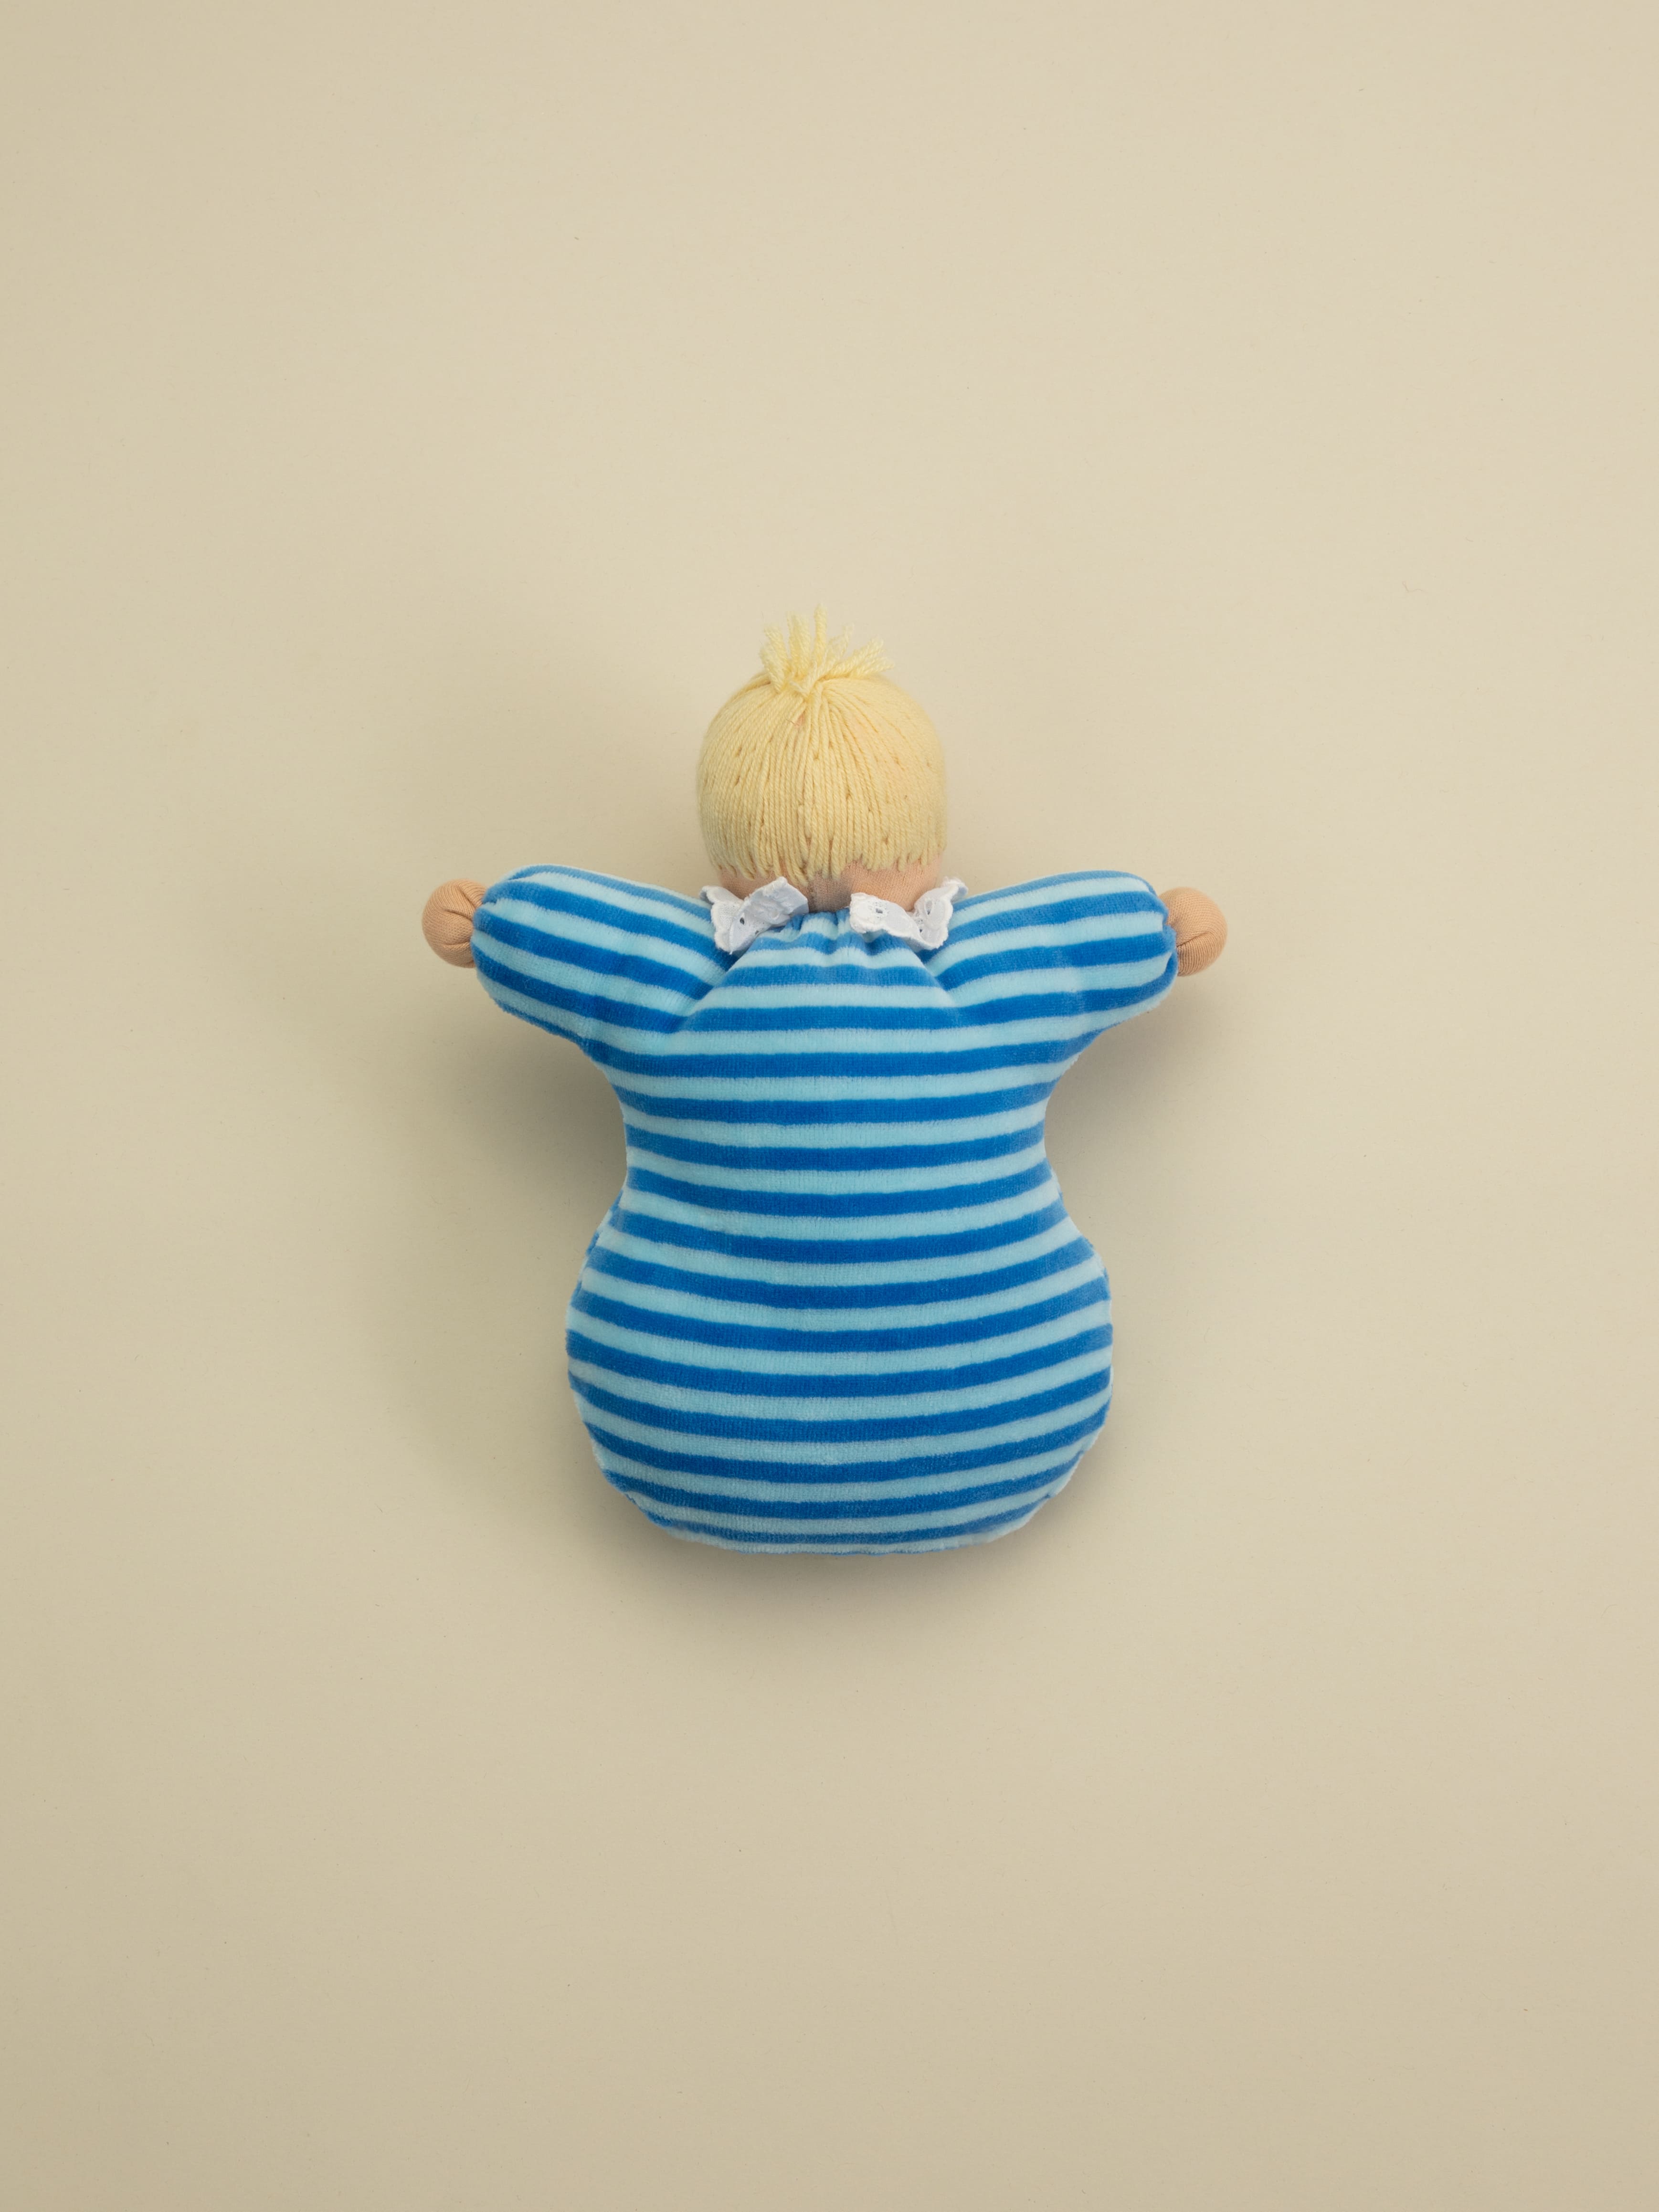 First born doll striped in blue and light blue